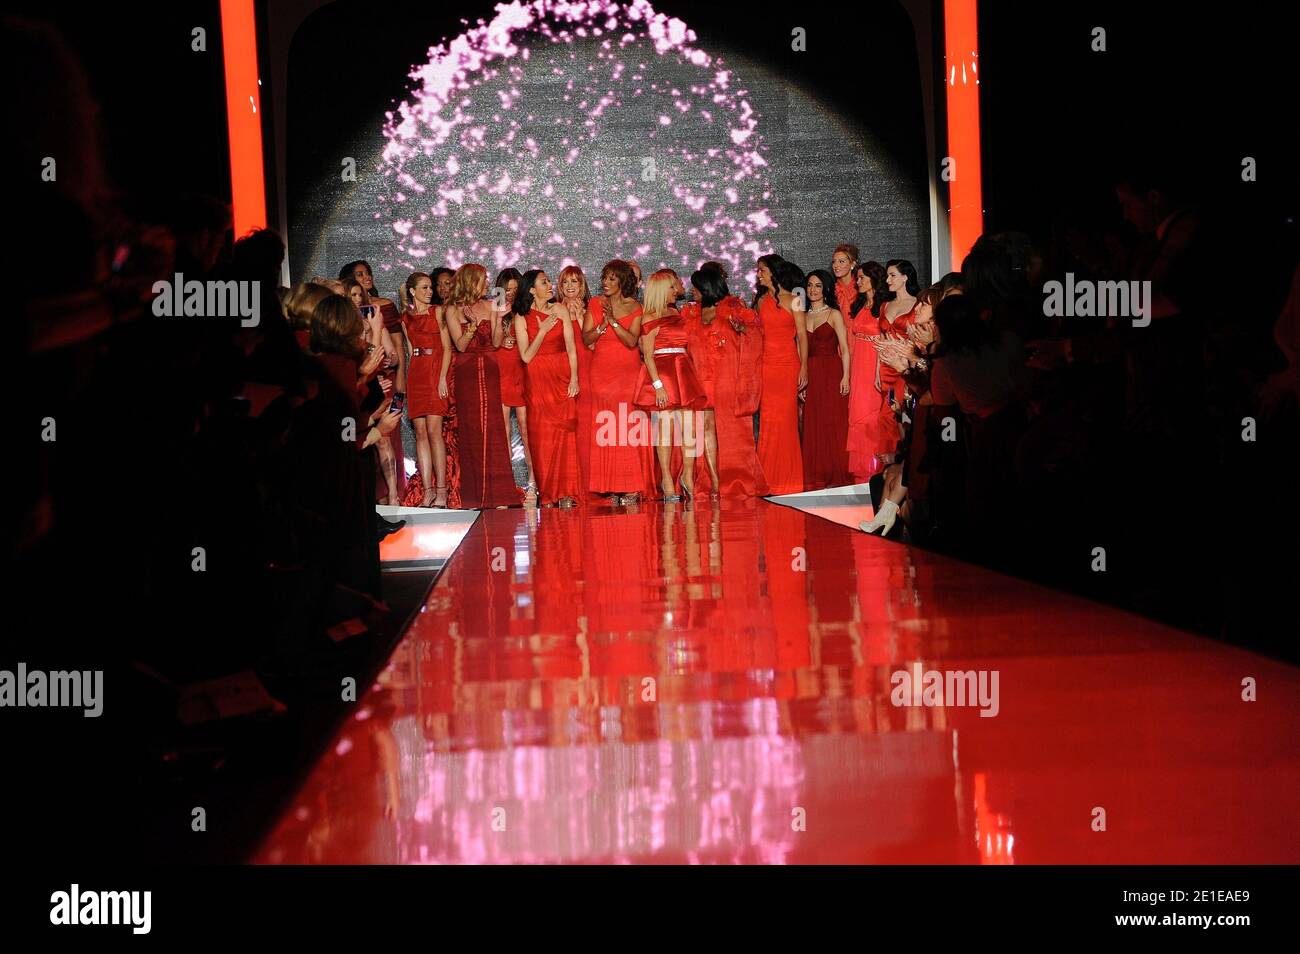 L-R: Katrina Bowden, Garcelle Beauvais, Cat Deeley, Giuliana Rancic, Ann Curry, Linda Gray, Gayle King, Suzanne Somers, Patti LaBelle, Camila Alves, Archie Panjabi, Eva Amurri, Denise Richards and Dita Von Teese on the runway during the Heart Truth's Red Dress Collection 2011 held during Mercedes Benz New York Fashion Week at Lincoln Center in New York City on February 09, 2011. Photo by Graylock/ABACAPRESS.COM Stock Photo